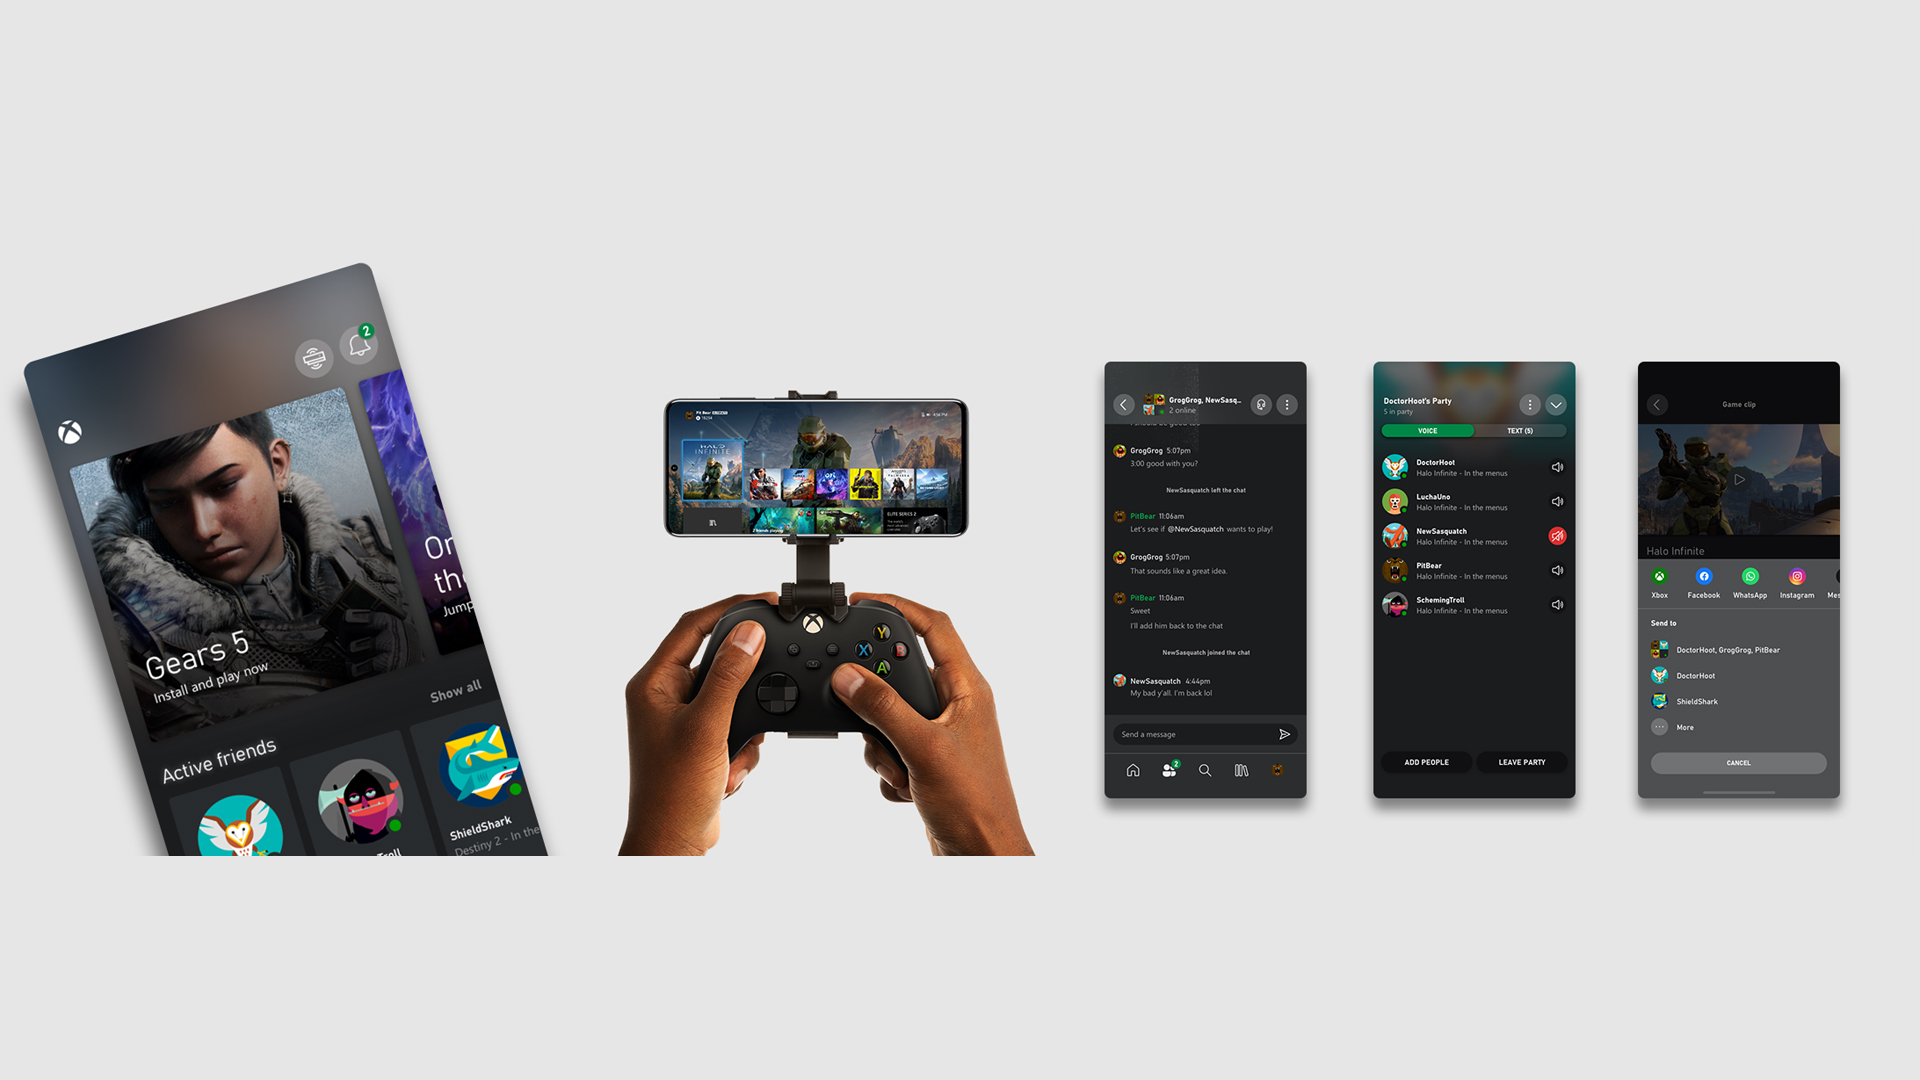 New Xbox App Mobile Keeps Connected to Your Games, Friends, and Fun - Xbox Wire